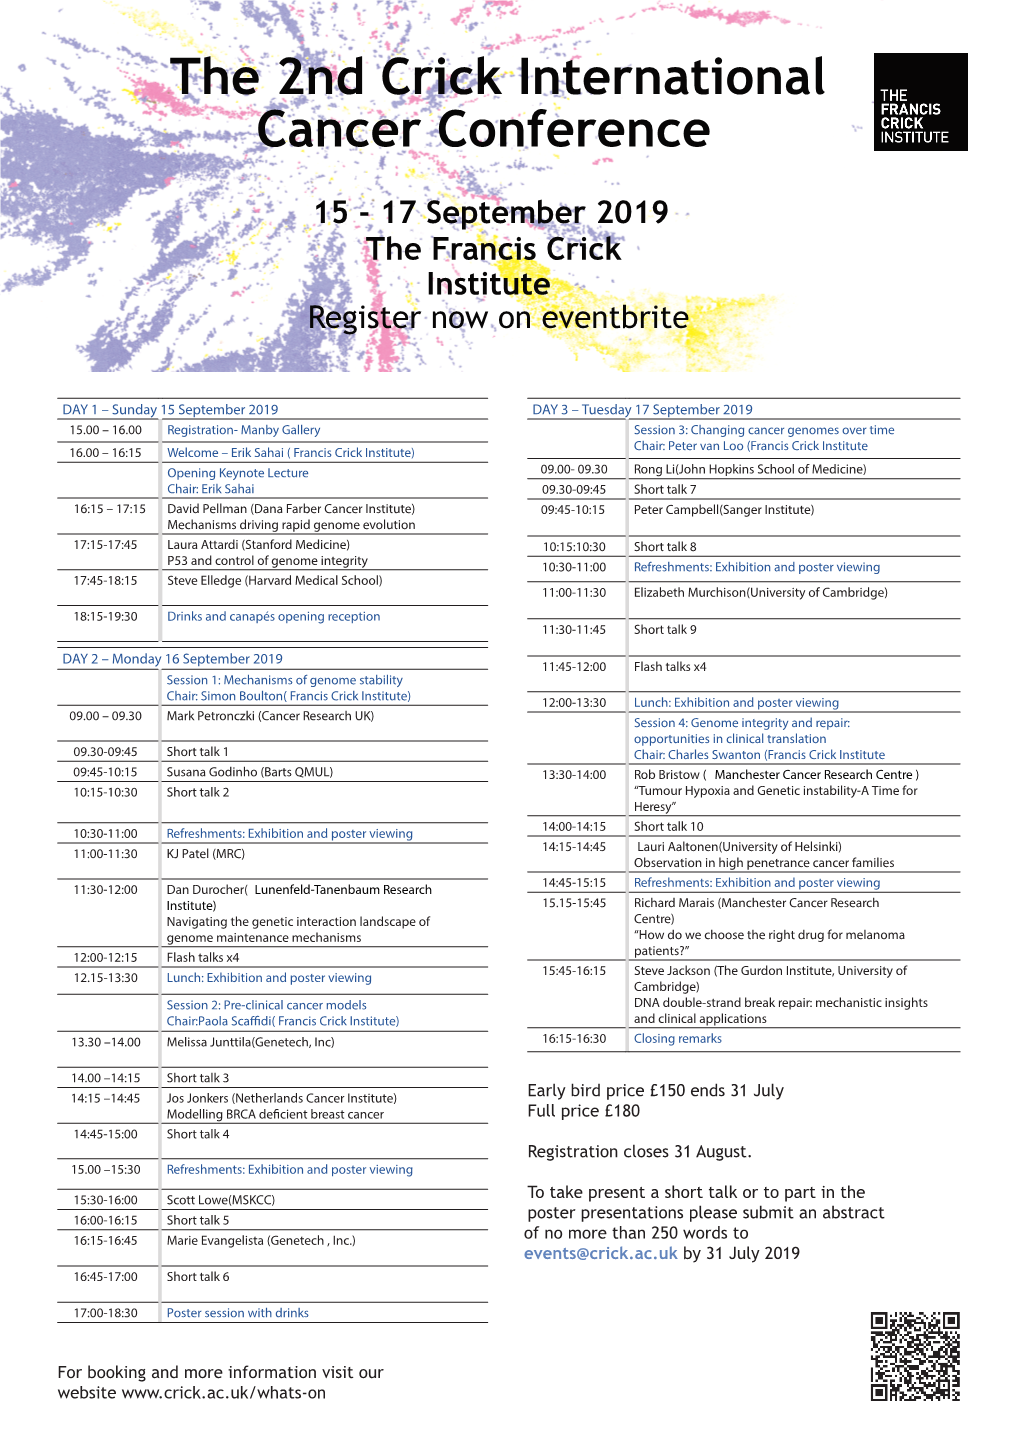 The 2Nd Crick International Cancer Conference